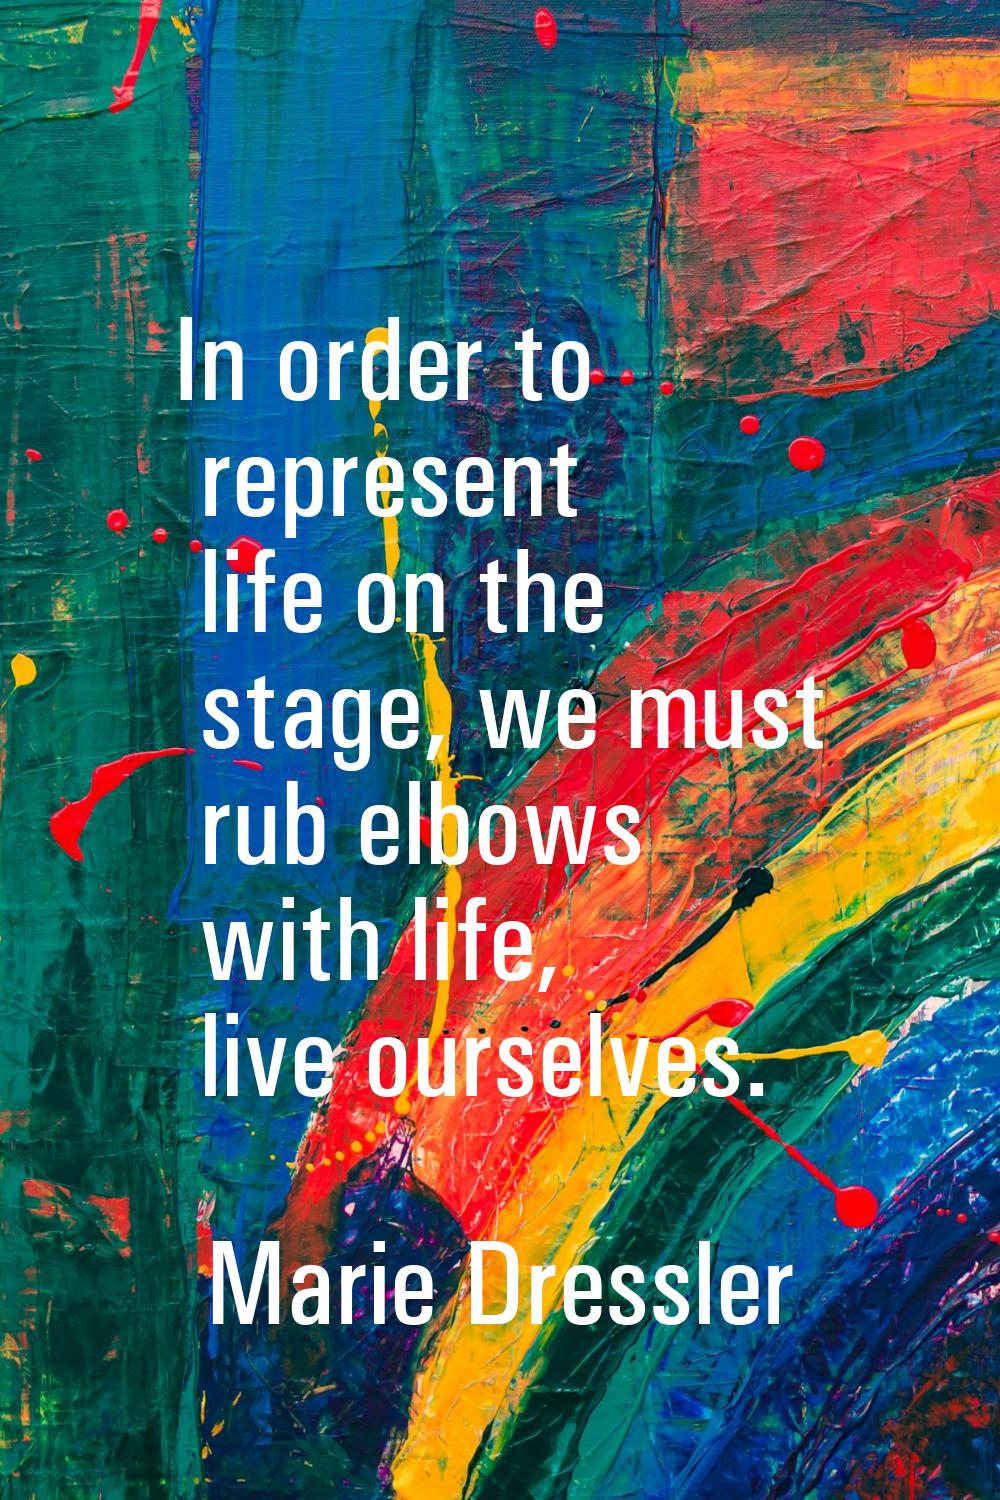 In order to represent life on the stage, we must rub elbows with life, live ourselves.